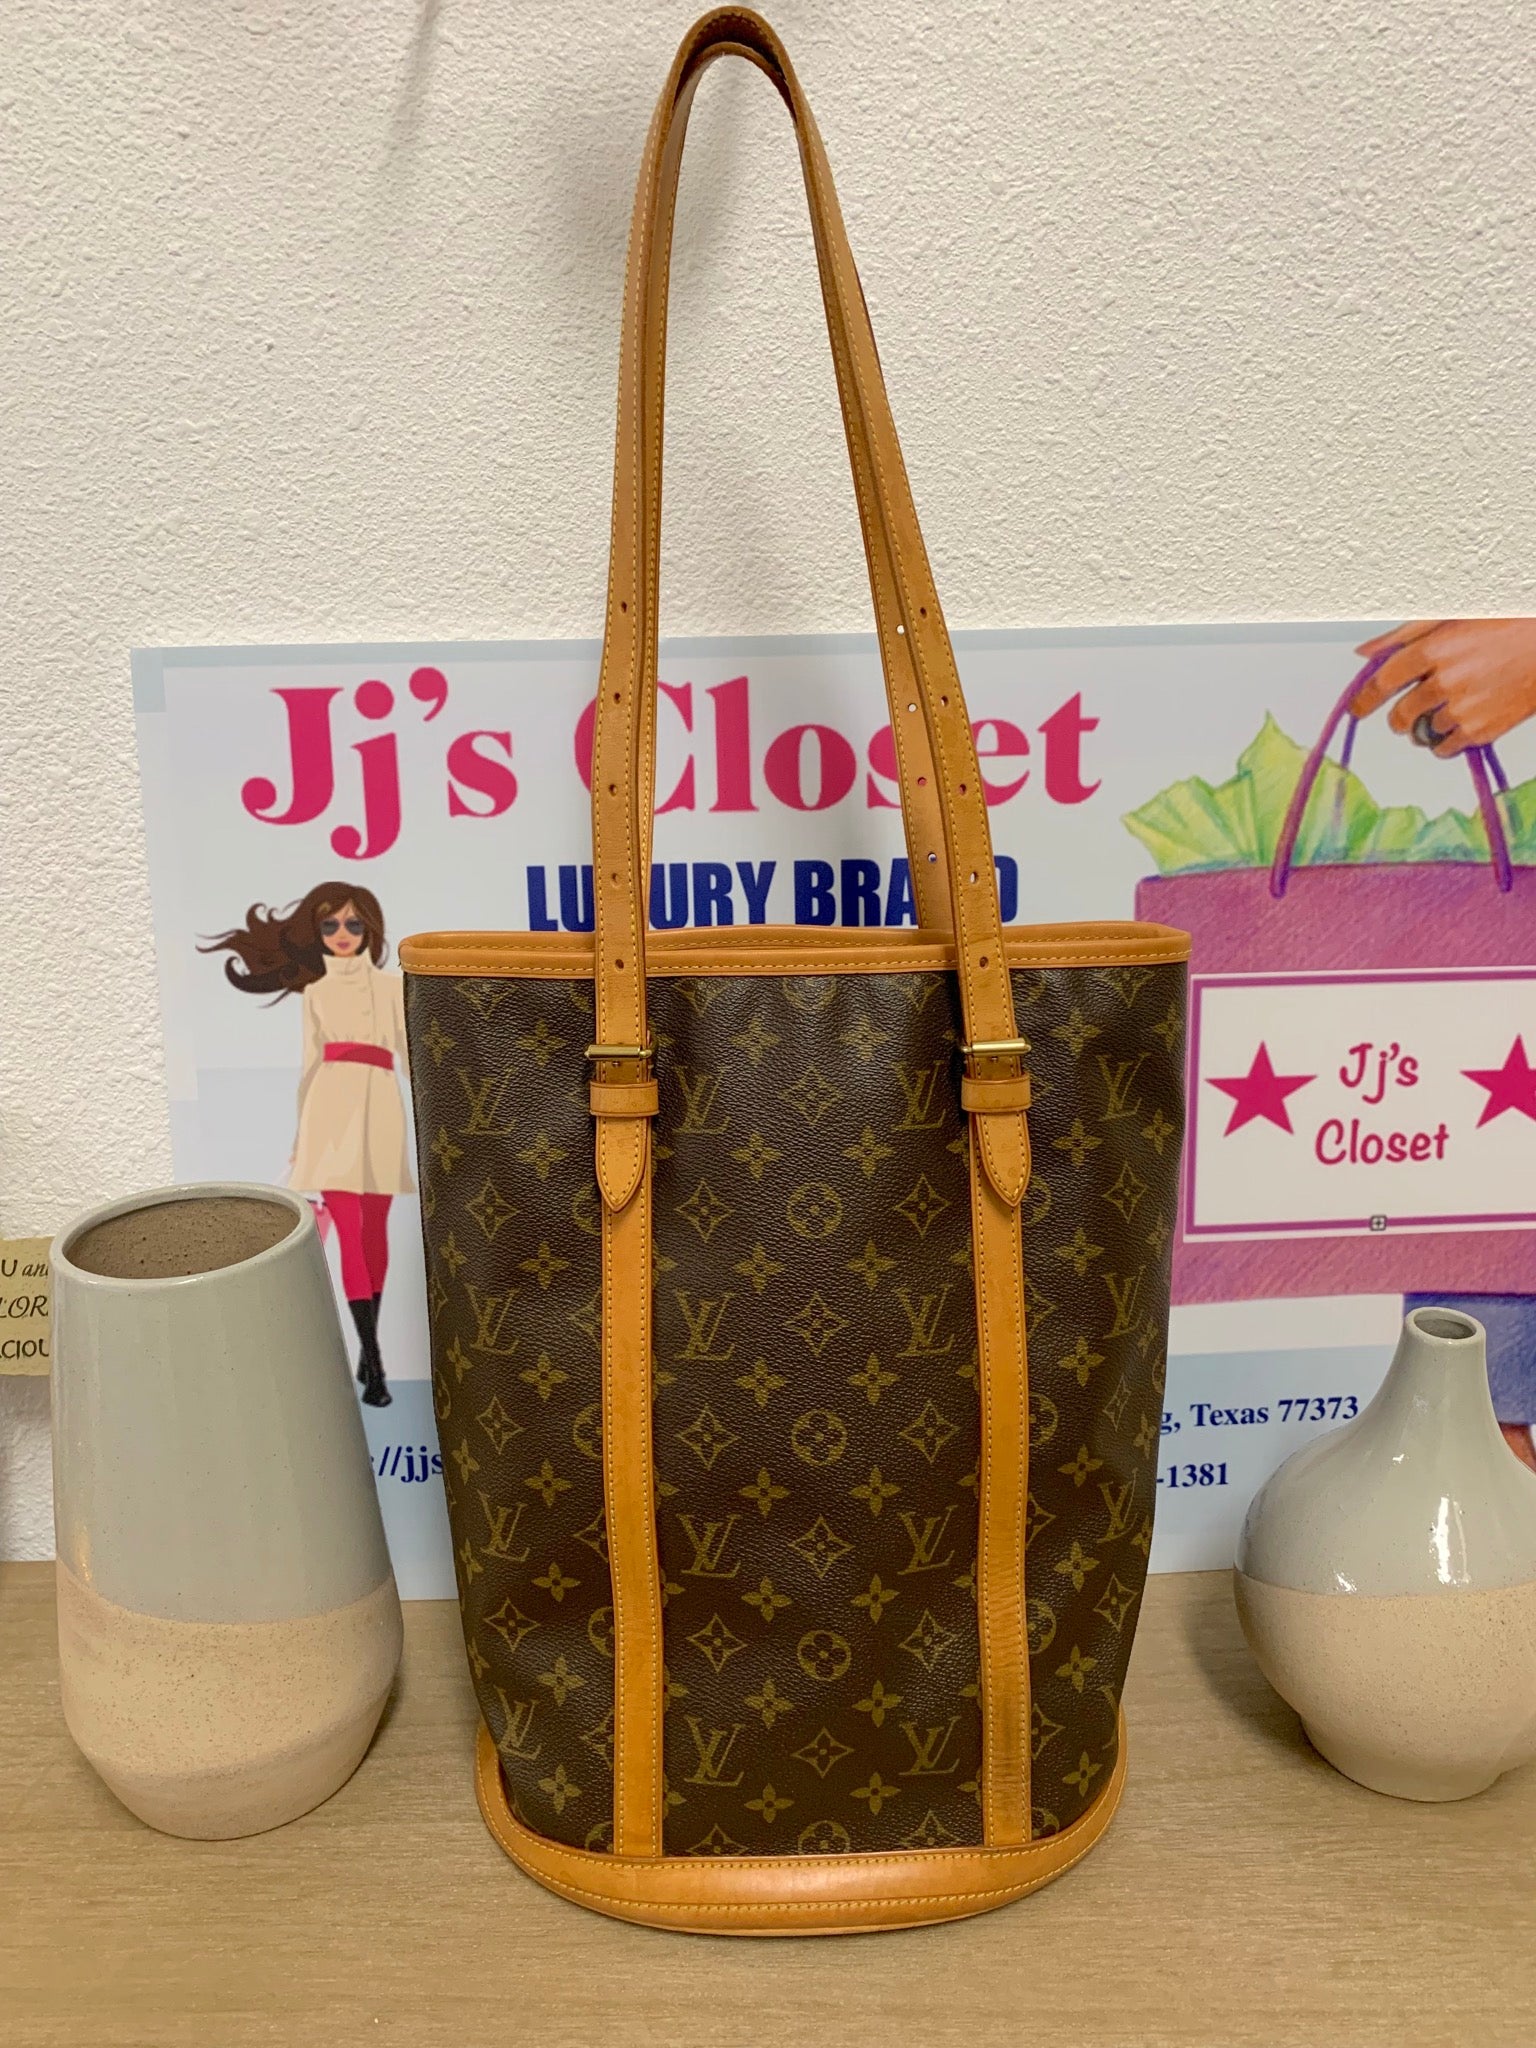 Pre Owned Lv Bags Philippines